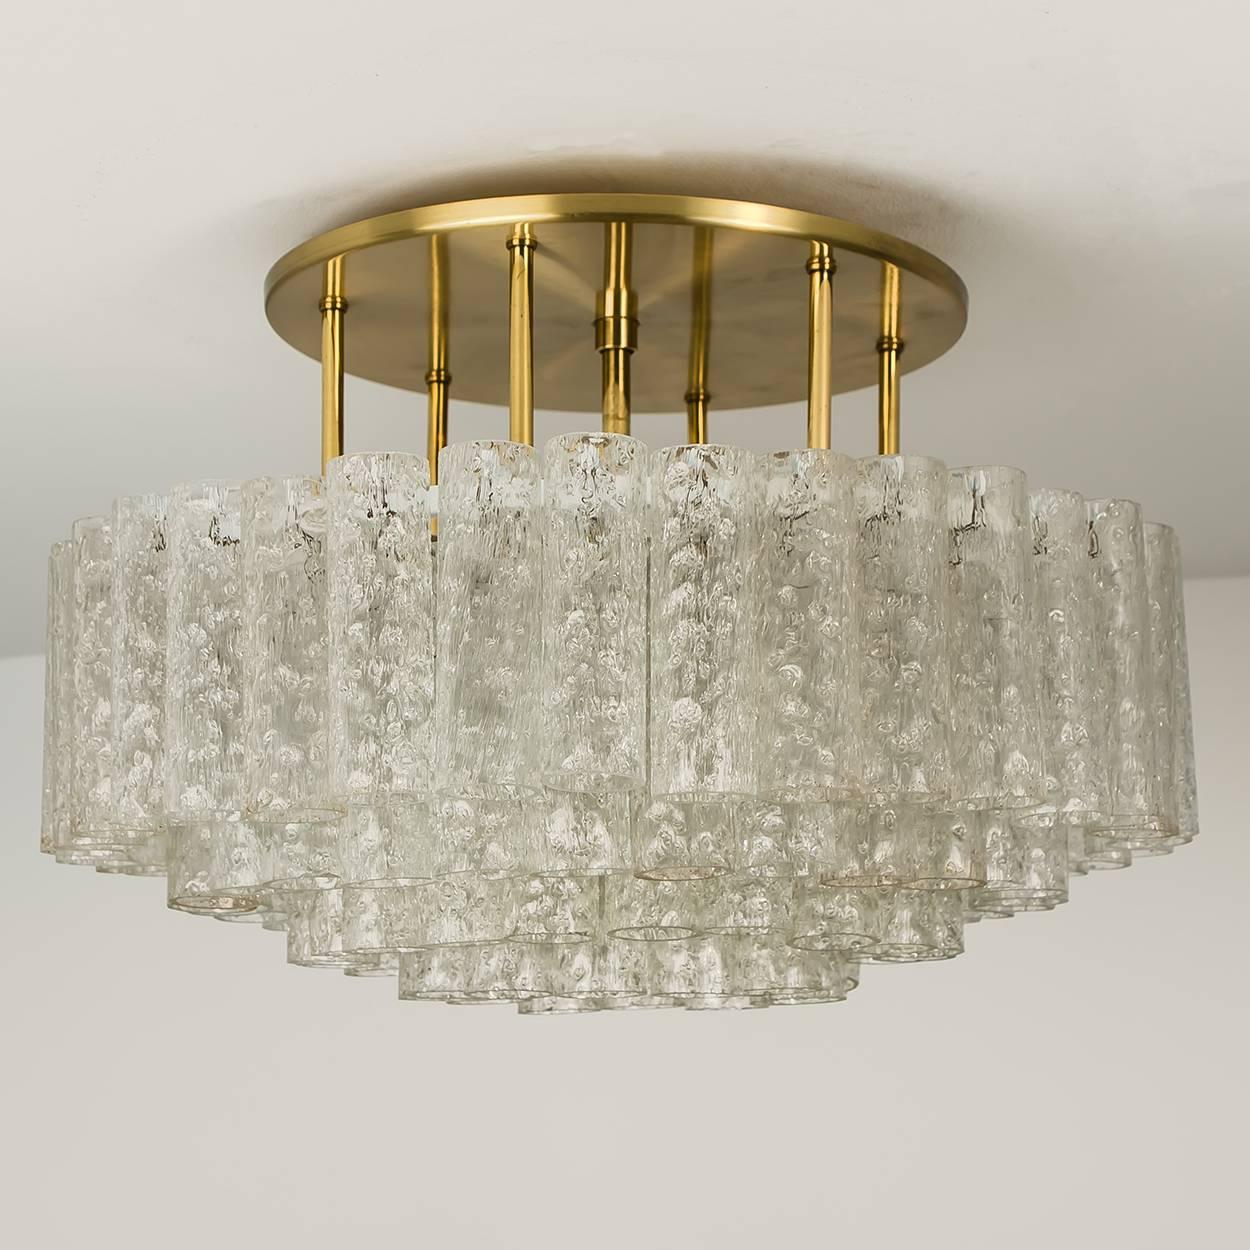 Set of Three Large Glass Brass Light Fixtures by Doria, Germany, 1969 For Sale 6